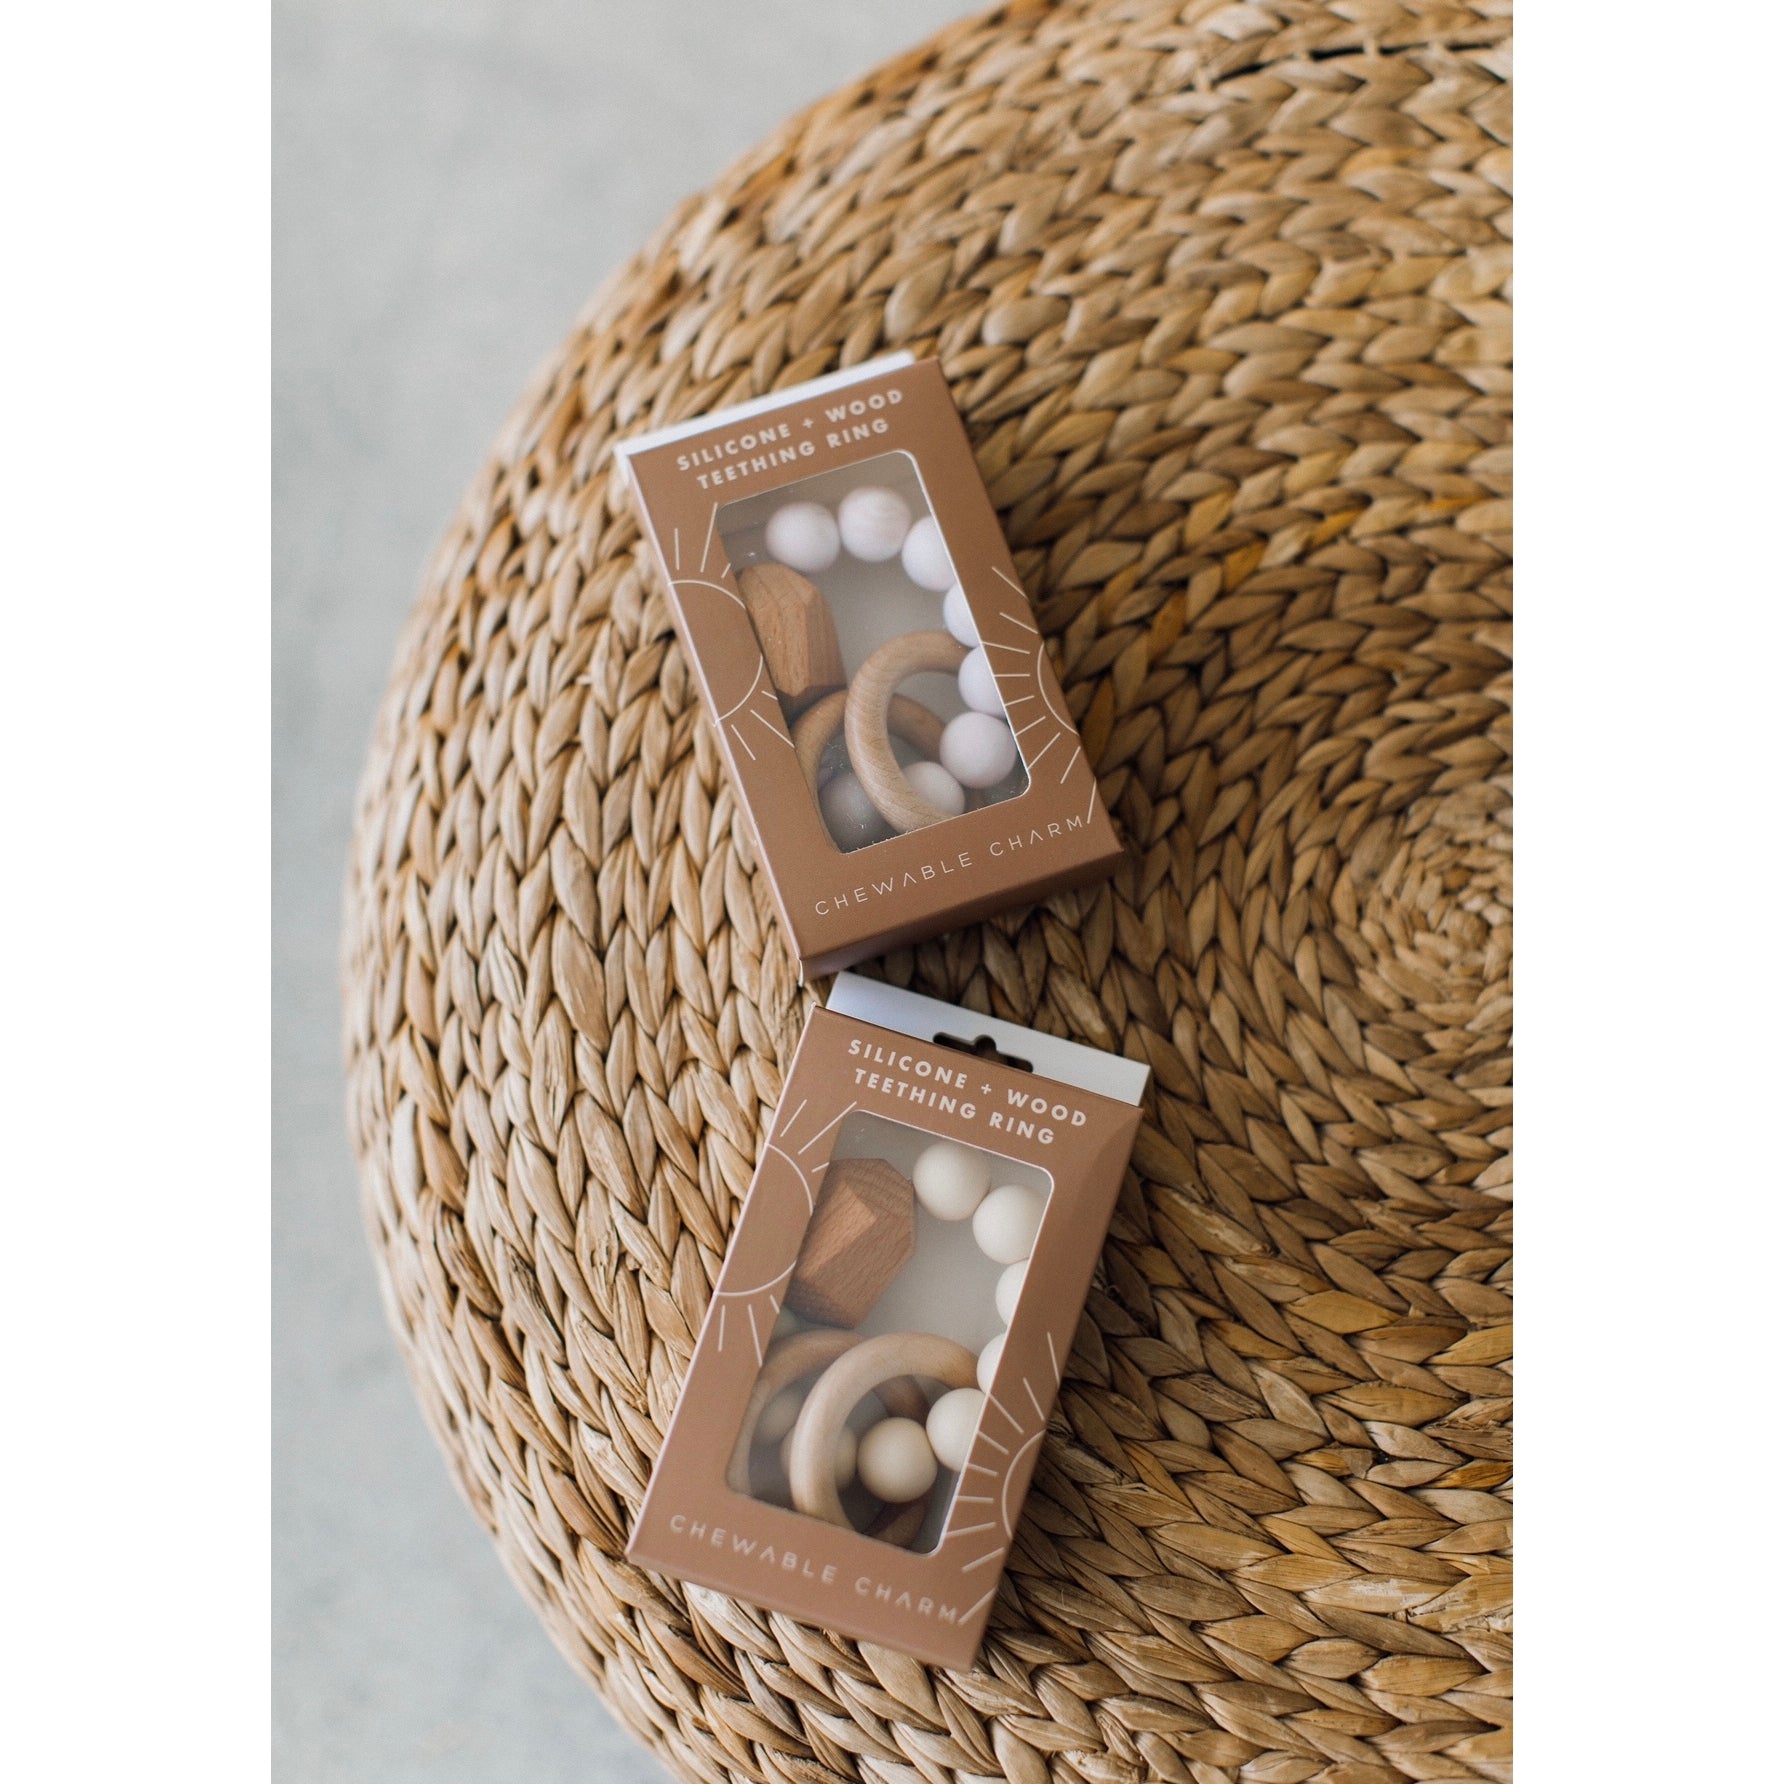 Chewable Charm Silicon Bead and Wooden Teething Toy - Zion Sand